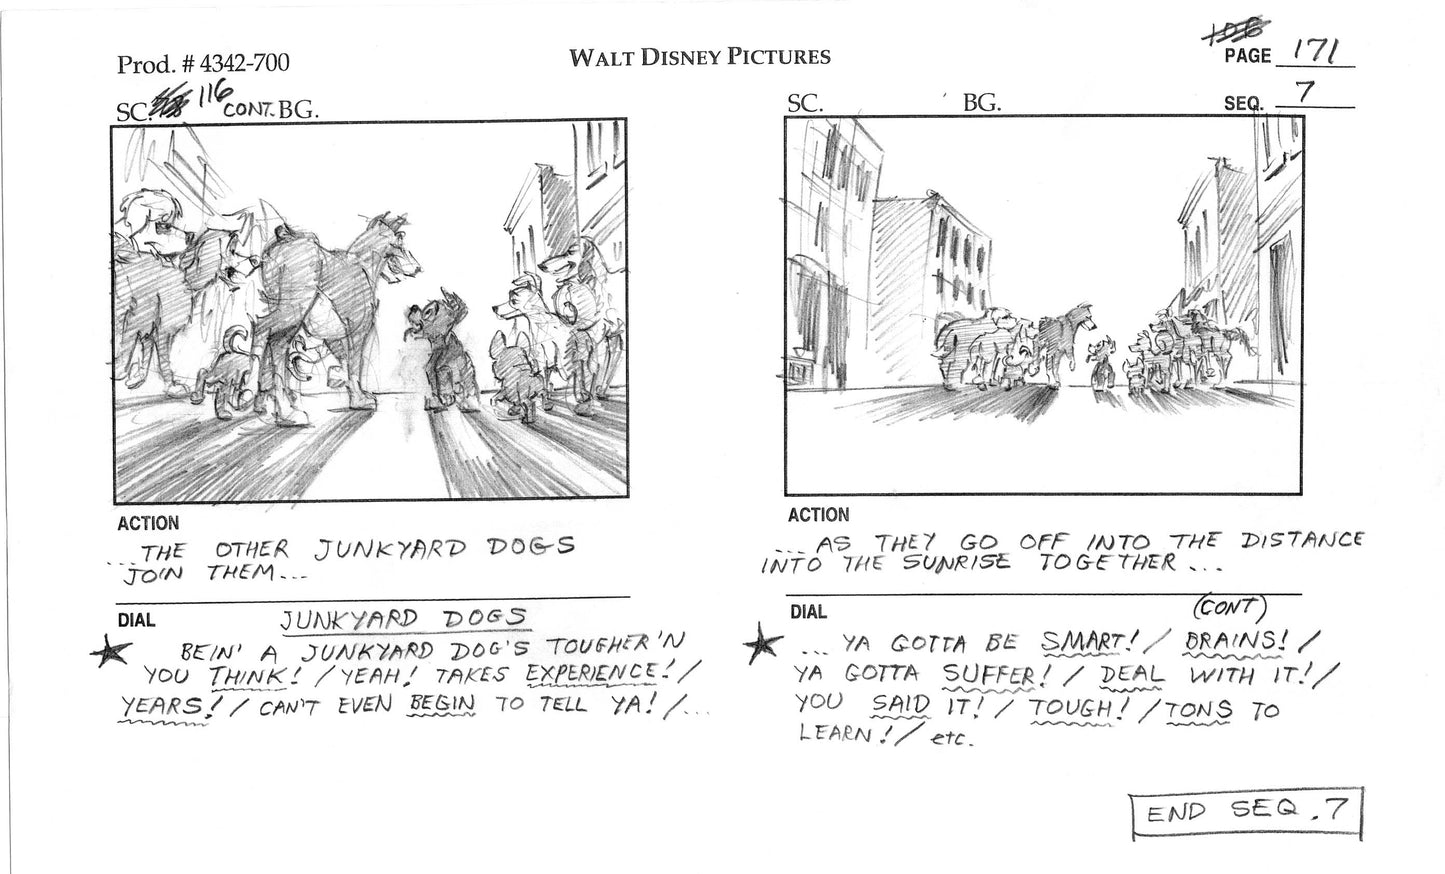 LADY and the TRAMP 2 Disney Production Storyboard Copy from Animators Estate 161 pages 2001